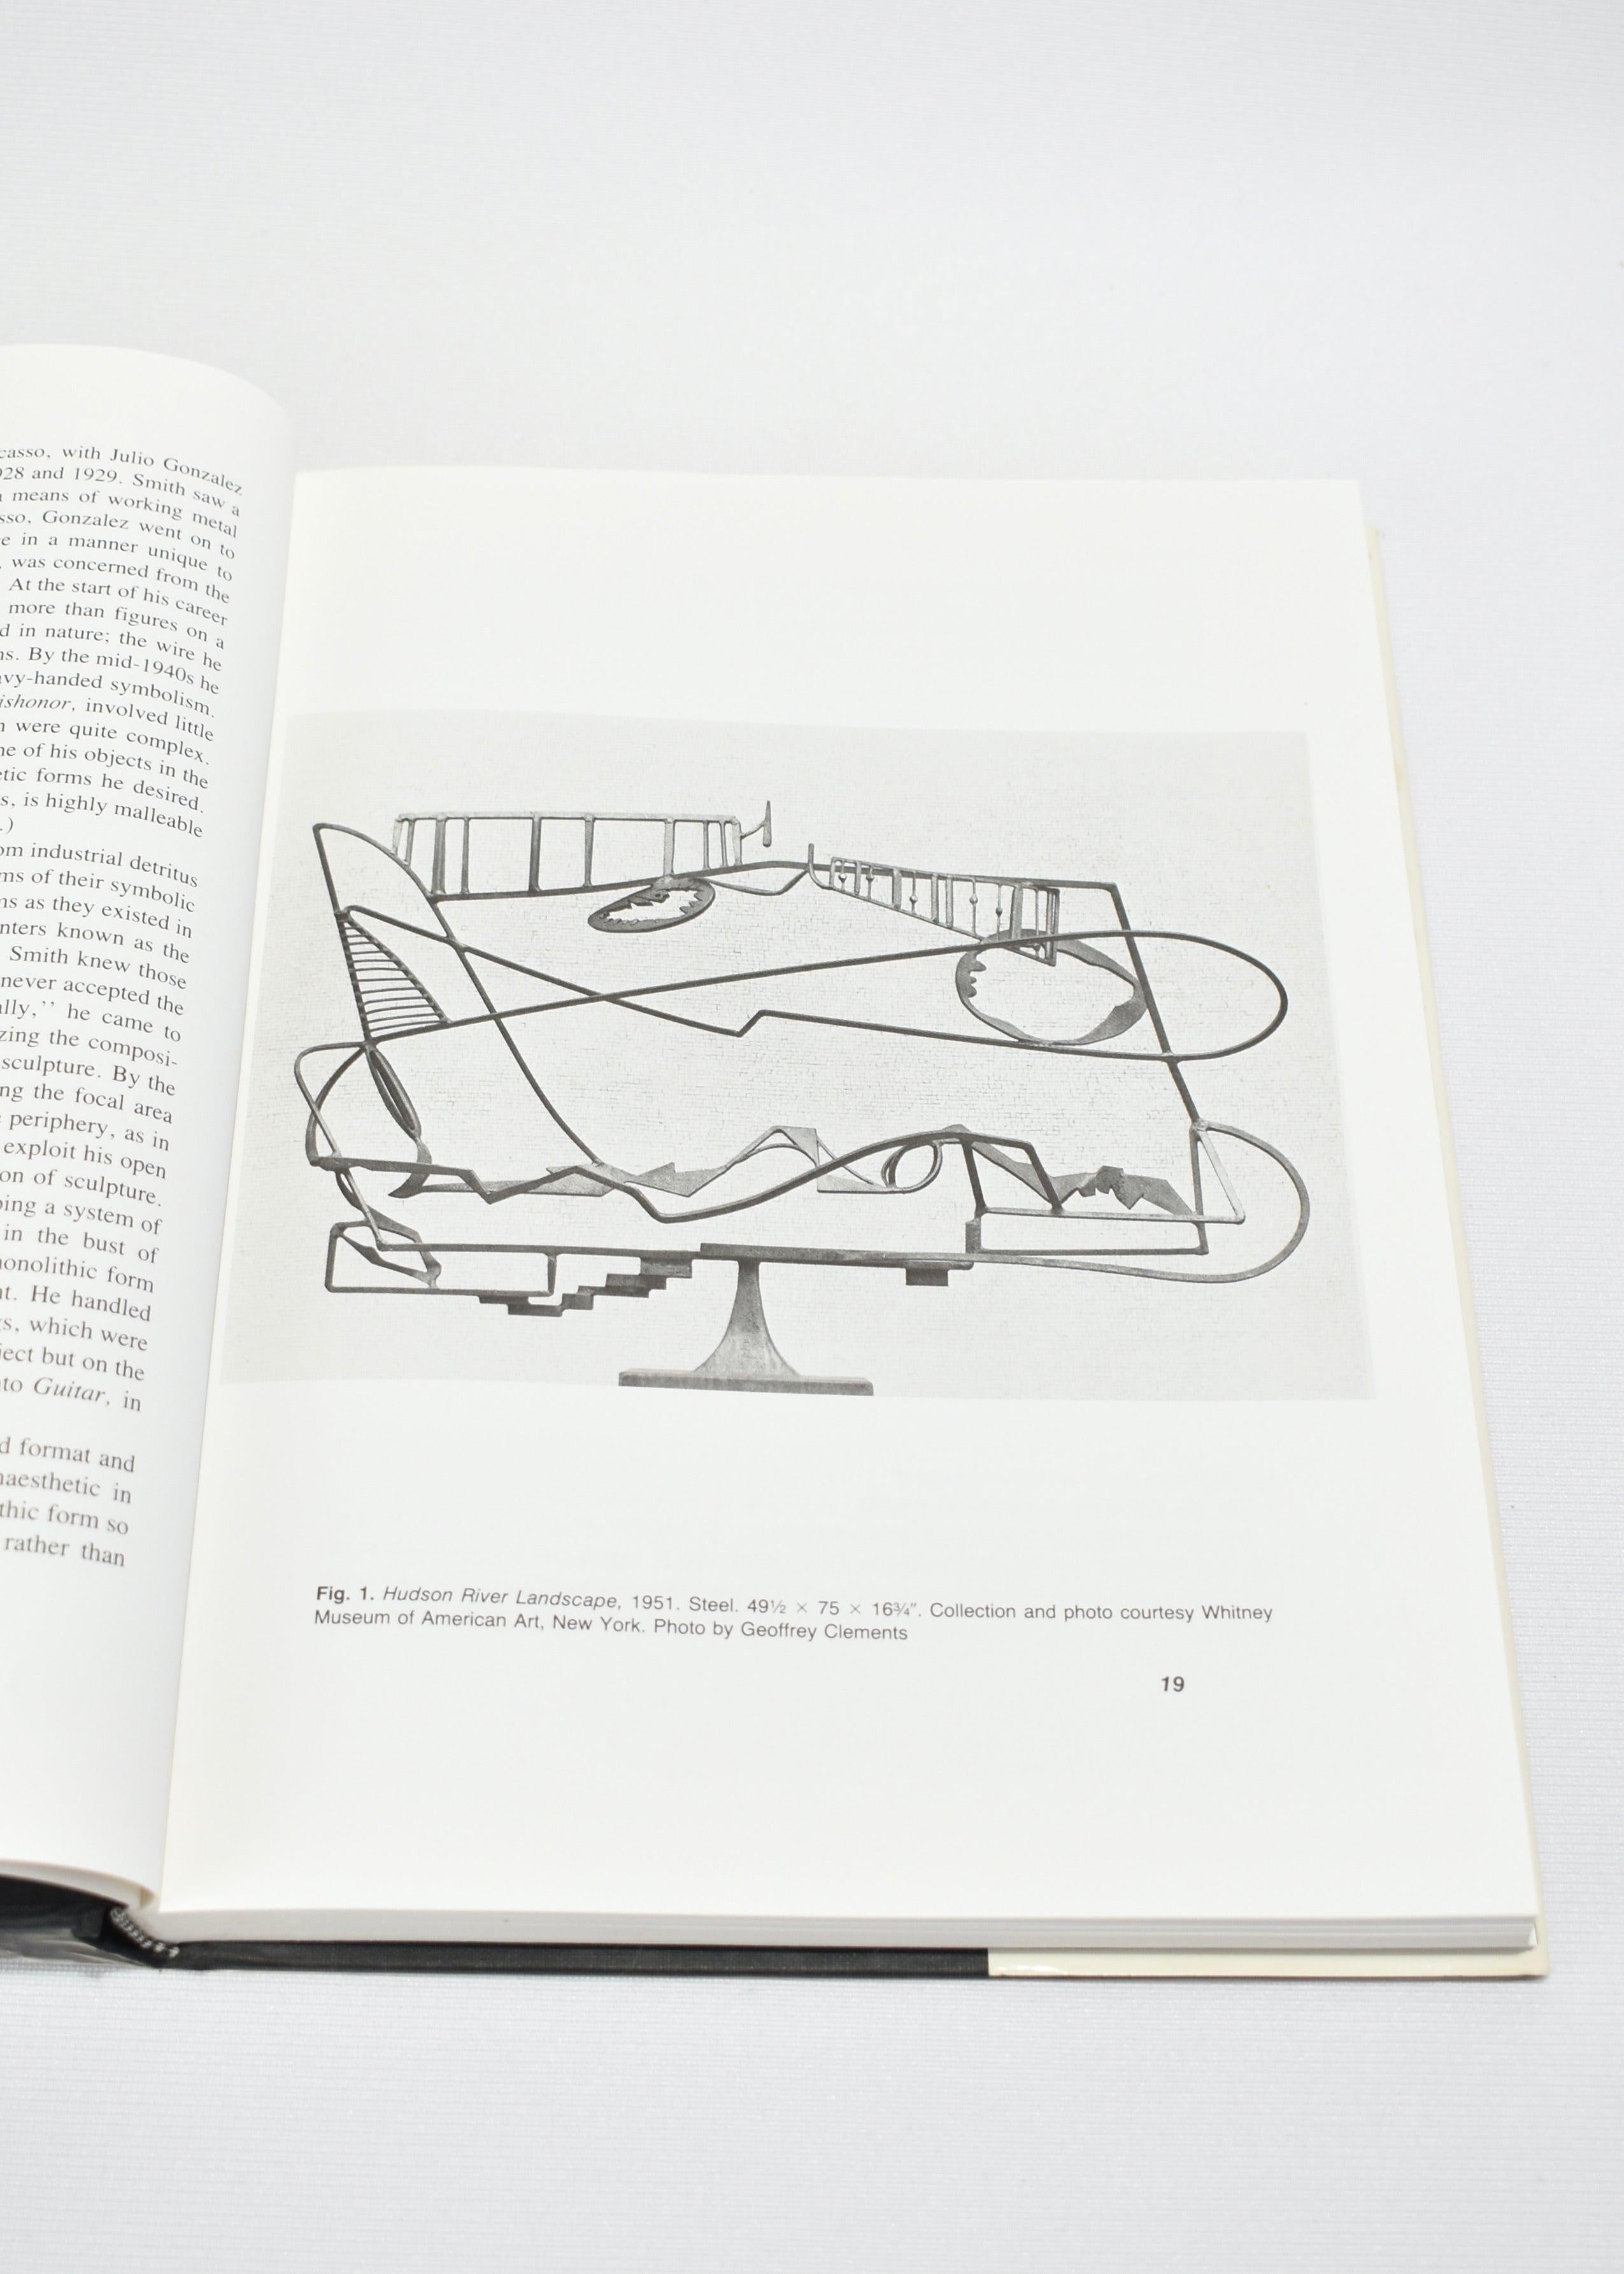 Hardback coffee table book discussing the work of sculptor, David Smith. By Stanley E. Marcus, published in 1983. First edition, signed, 207 pages.

